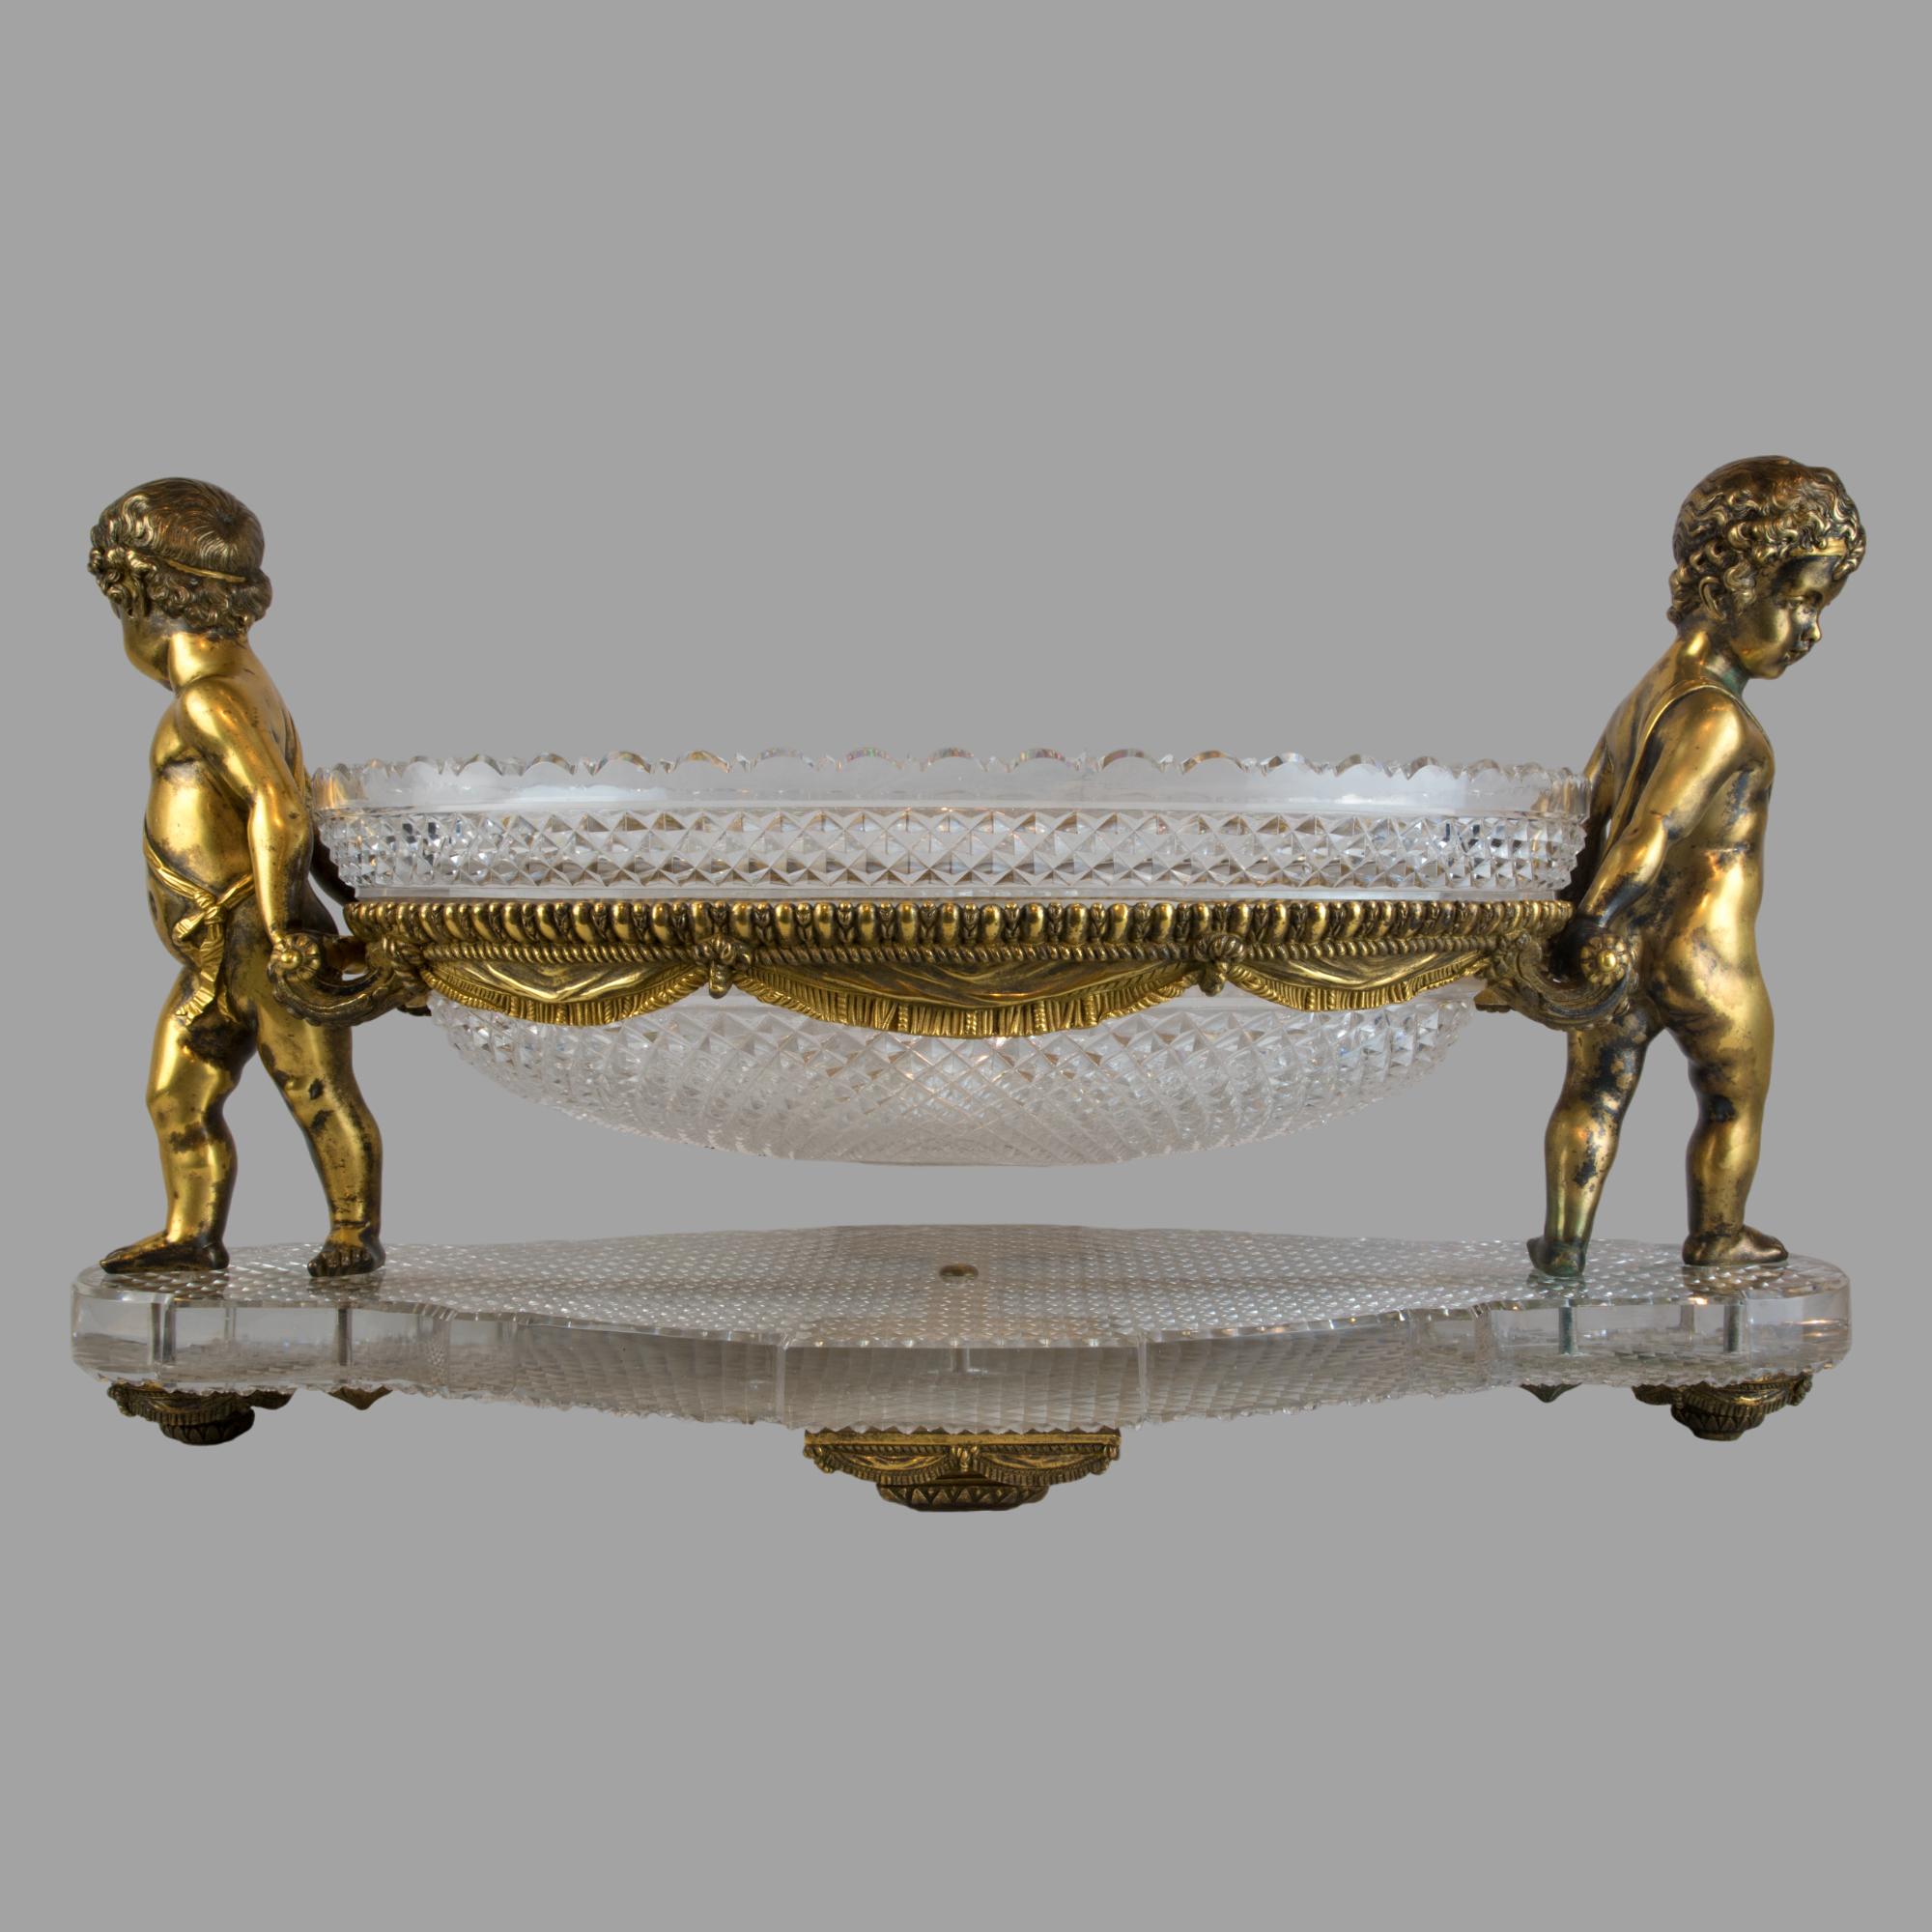 19th Century Louis XVI Style Gilt-Bronze and Cut Glass Figural Centerpiece att. to Baccarat For Sale